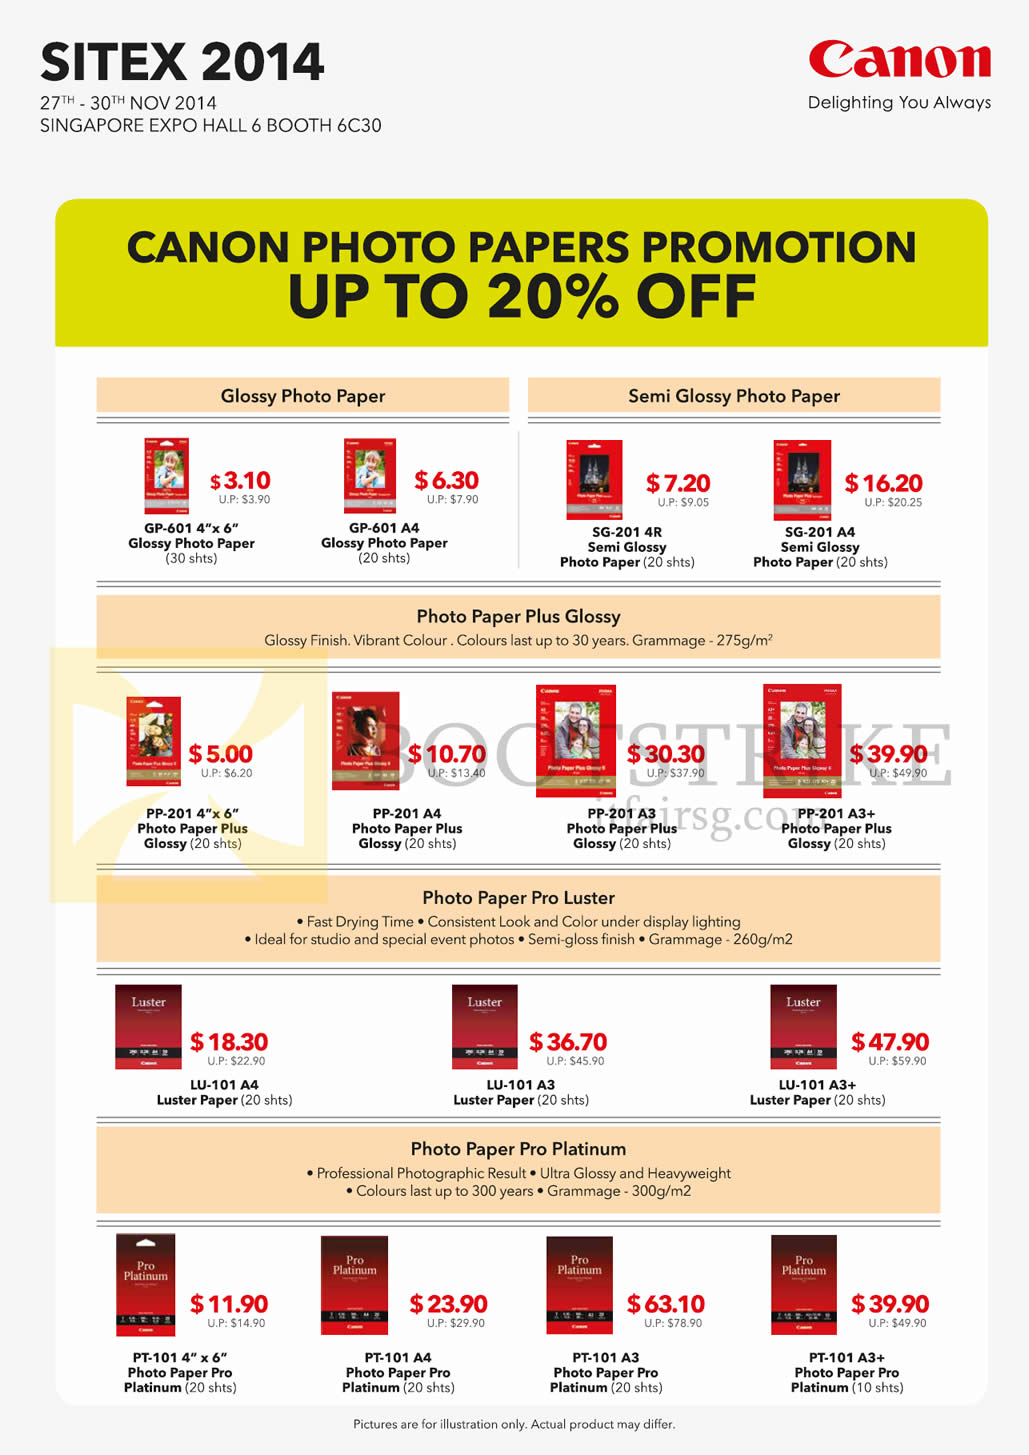 SITEX 2014 price list image brochure of Canon Photo Papers Glossy, Semi Glossy, Photo Paper Plus Glossy, Photo Paper Pro Luster, Photo Paper Pro Platinum